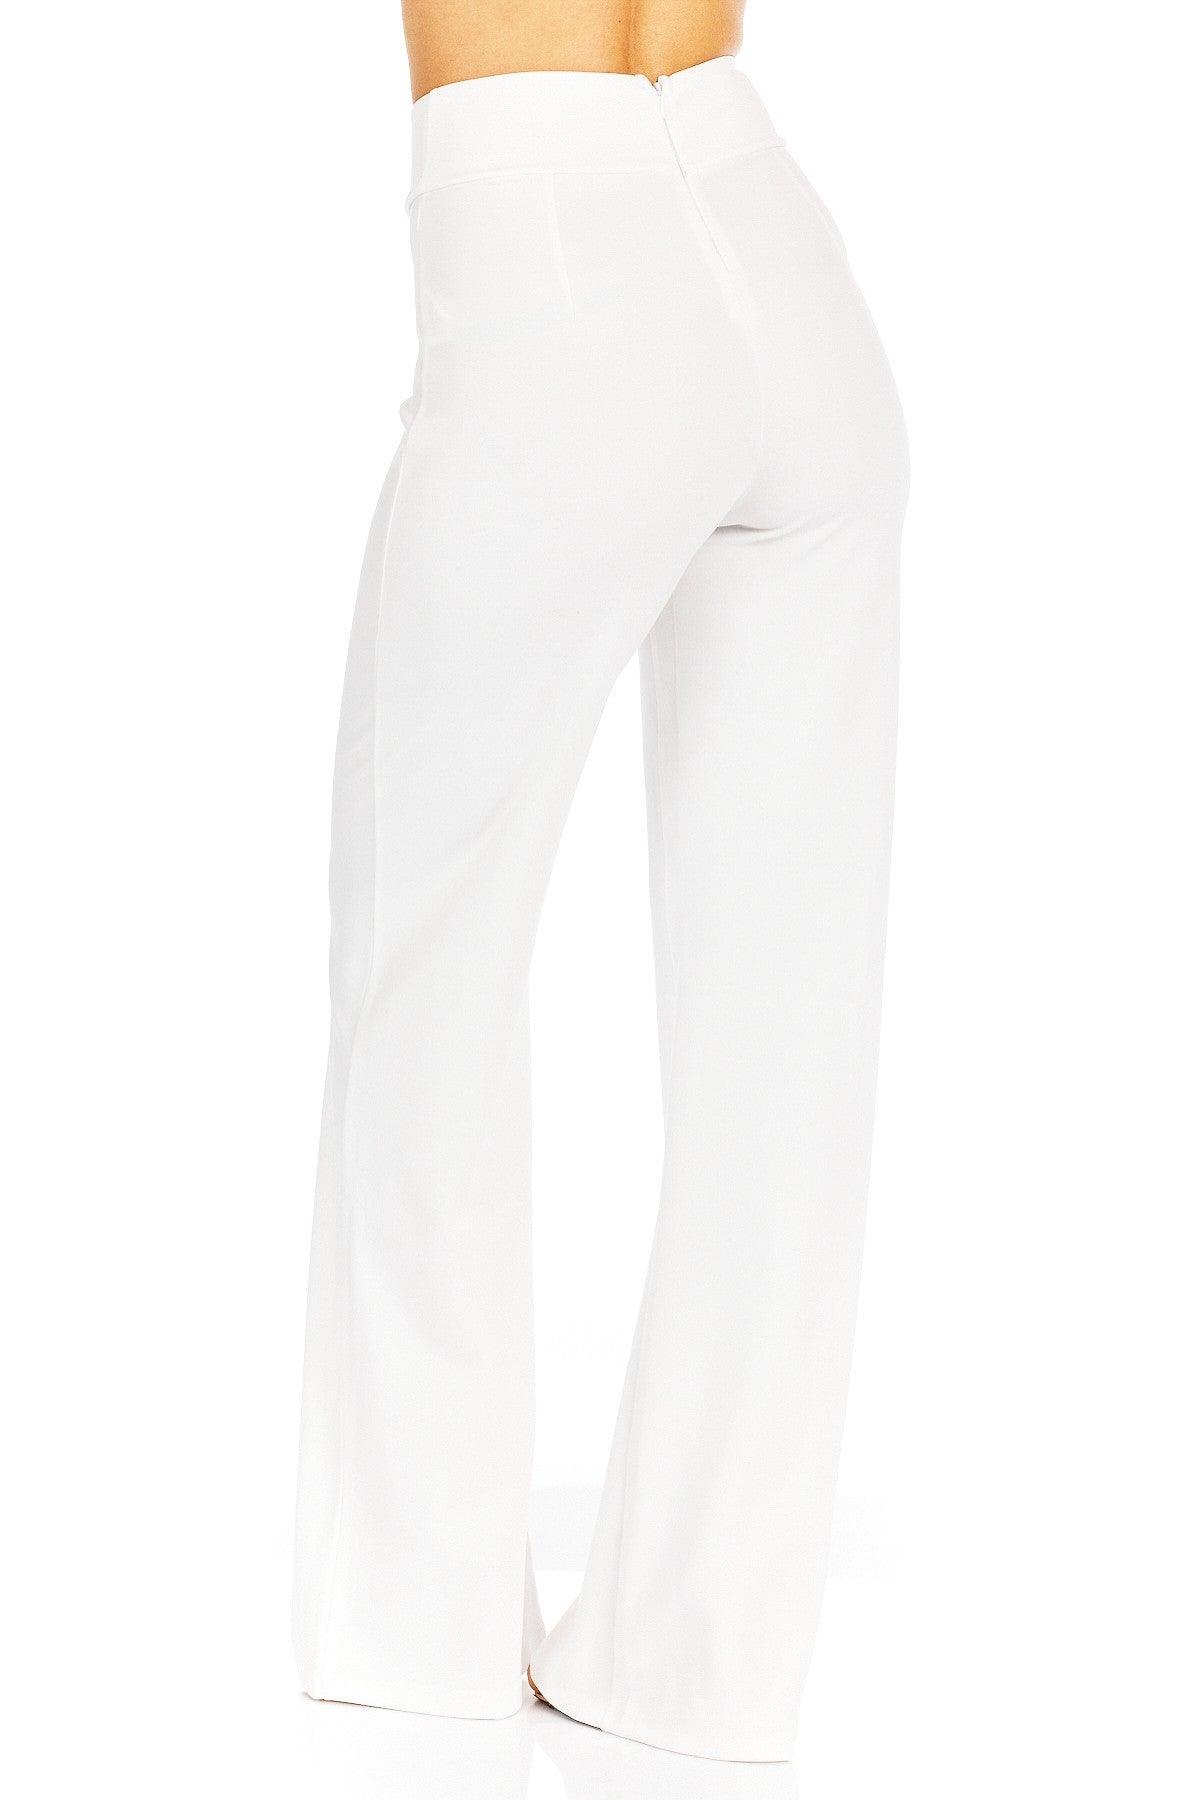 SAVLUXE Front-line Flared Leg Design Solid Pants